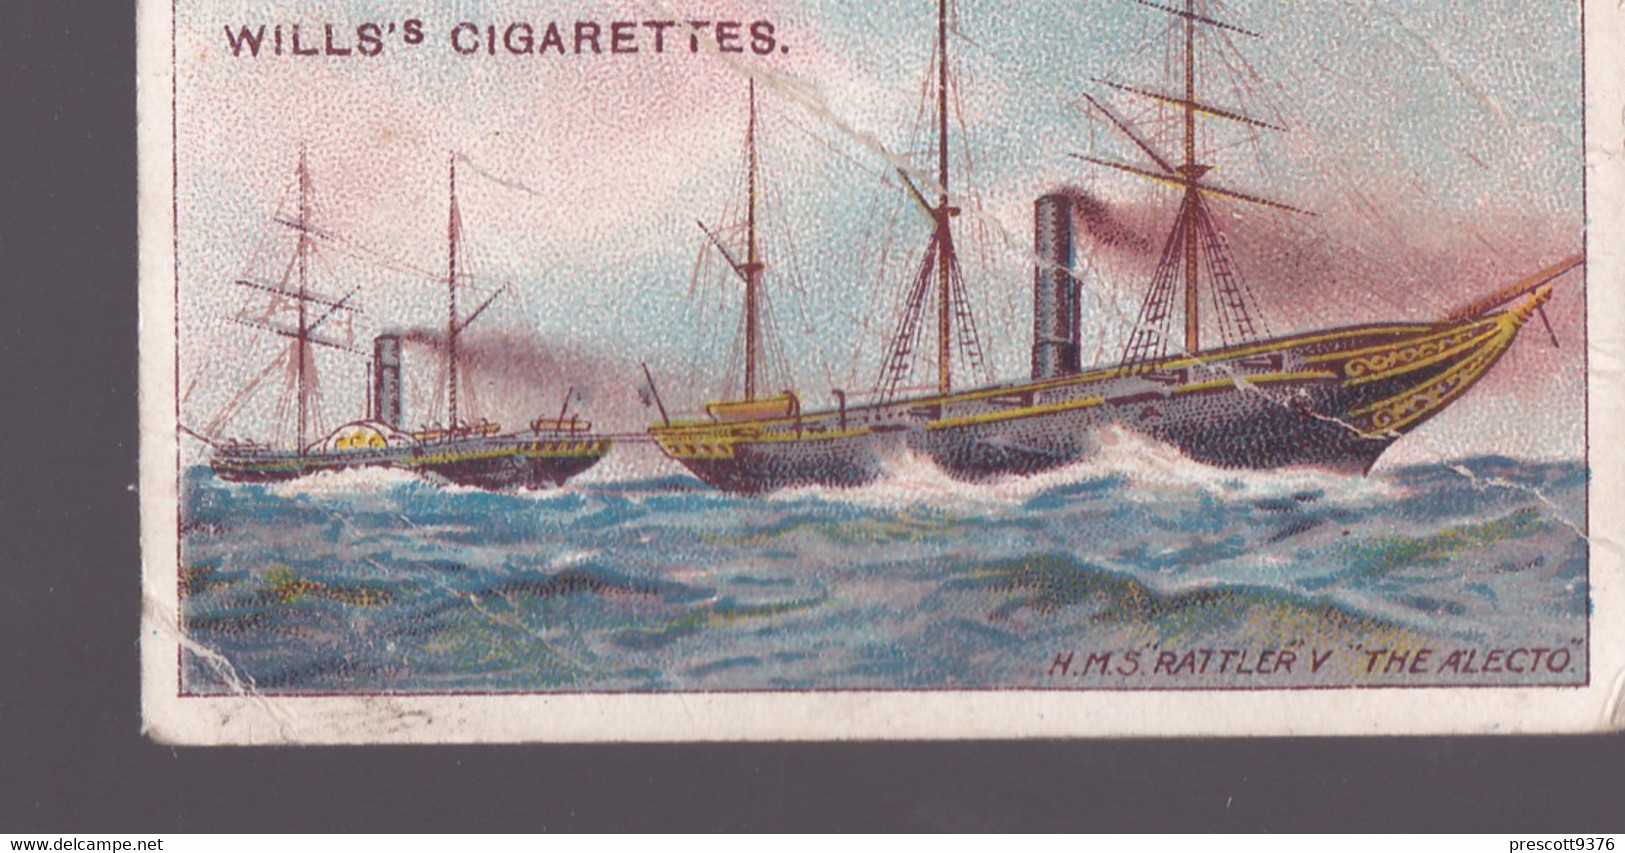 Celebrated Ships 1911 - Wills Cigarette Card - Celebrated Ships - 21 HMS Rattler V The Alecto - Wills